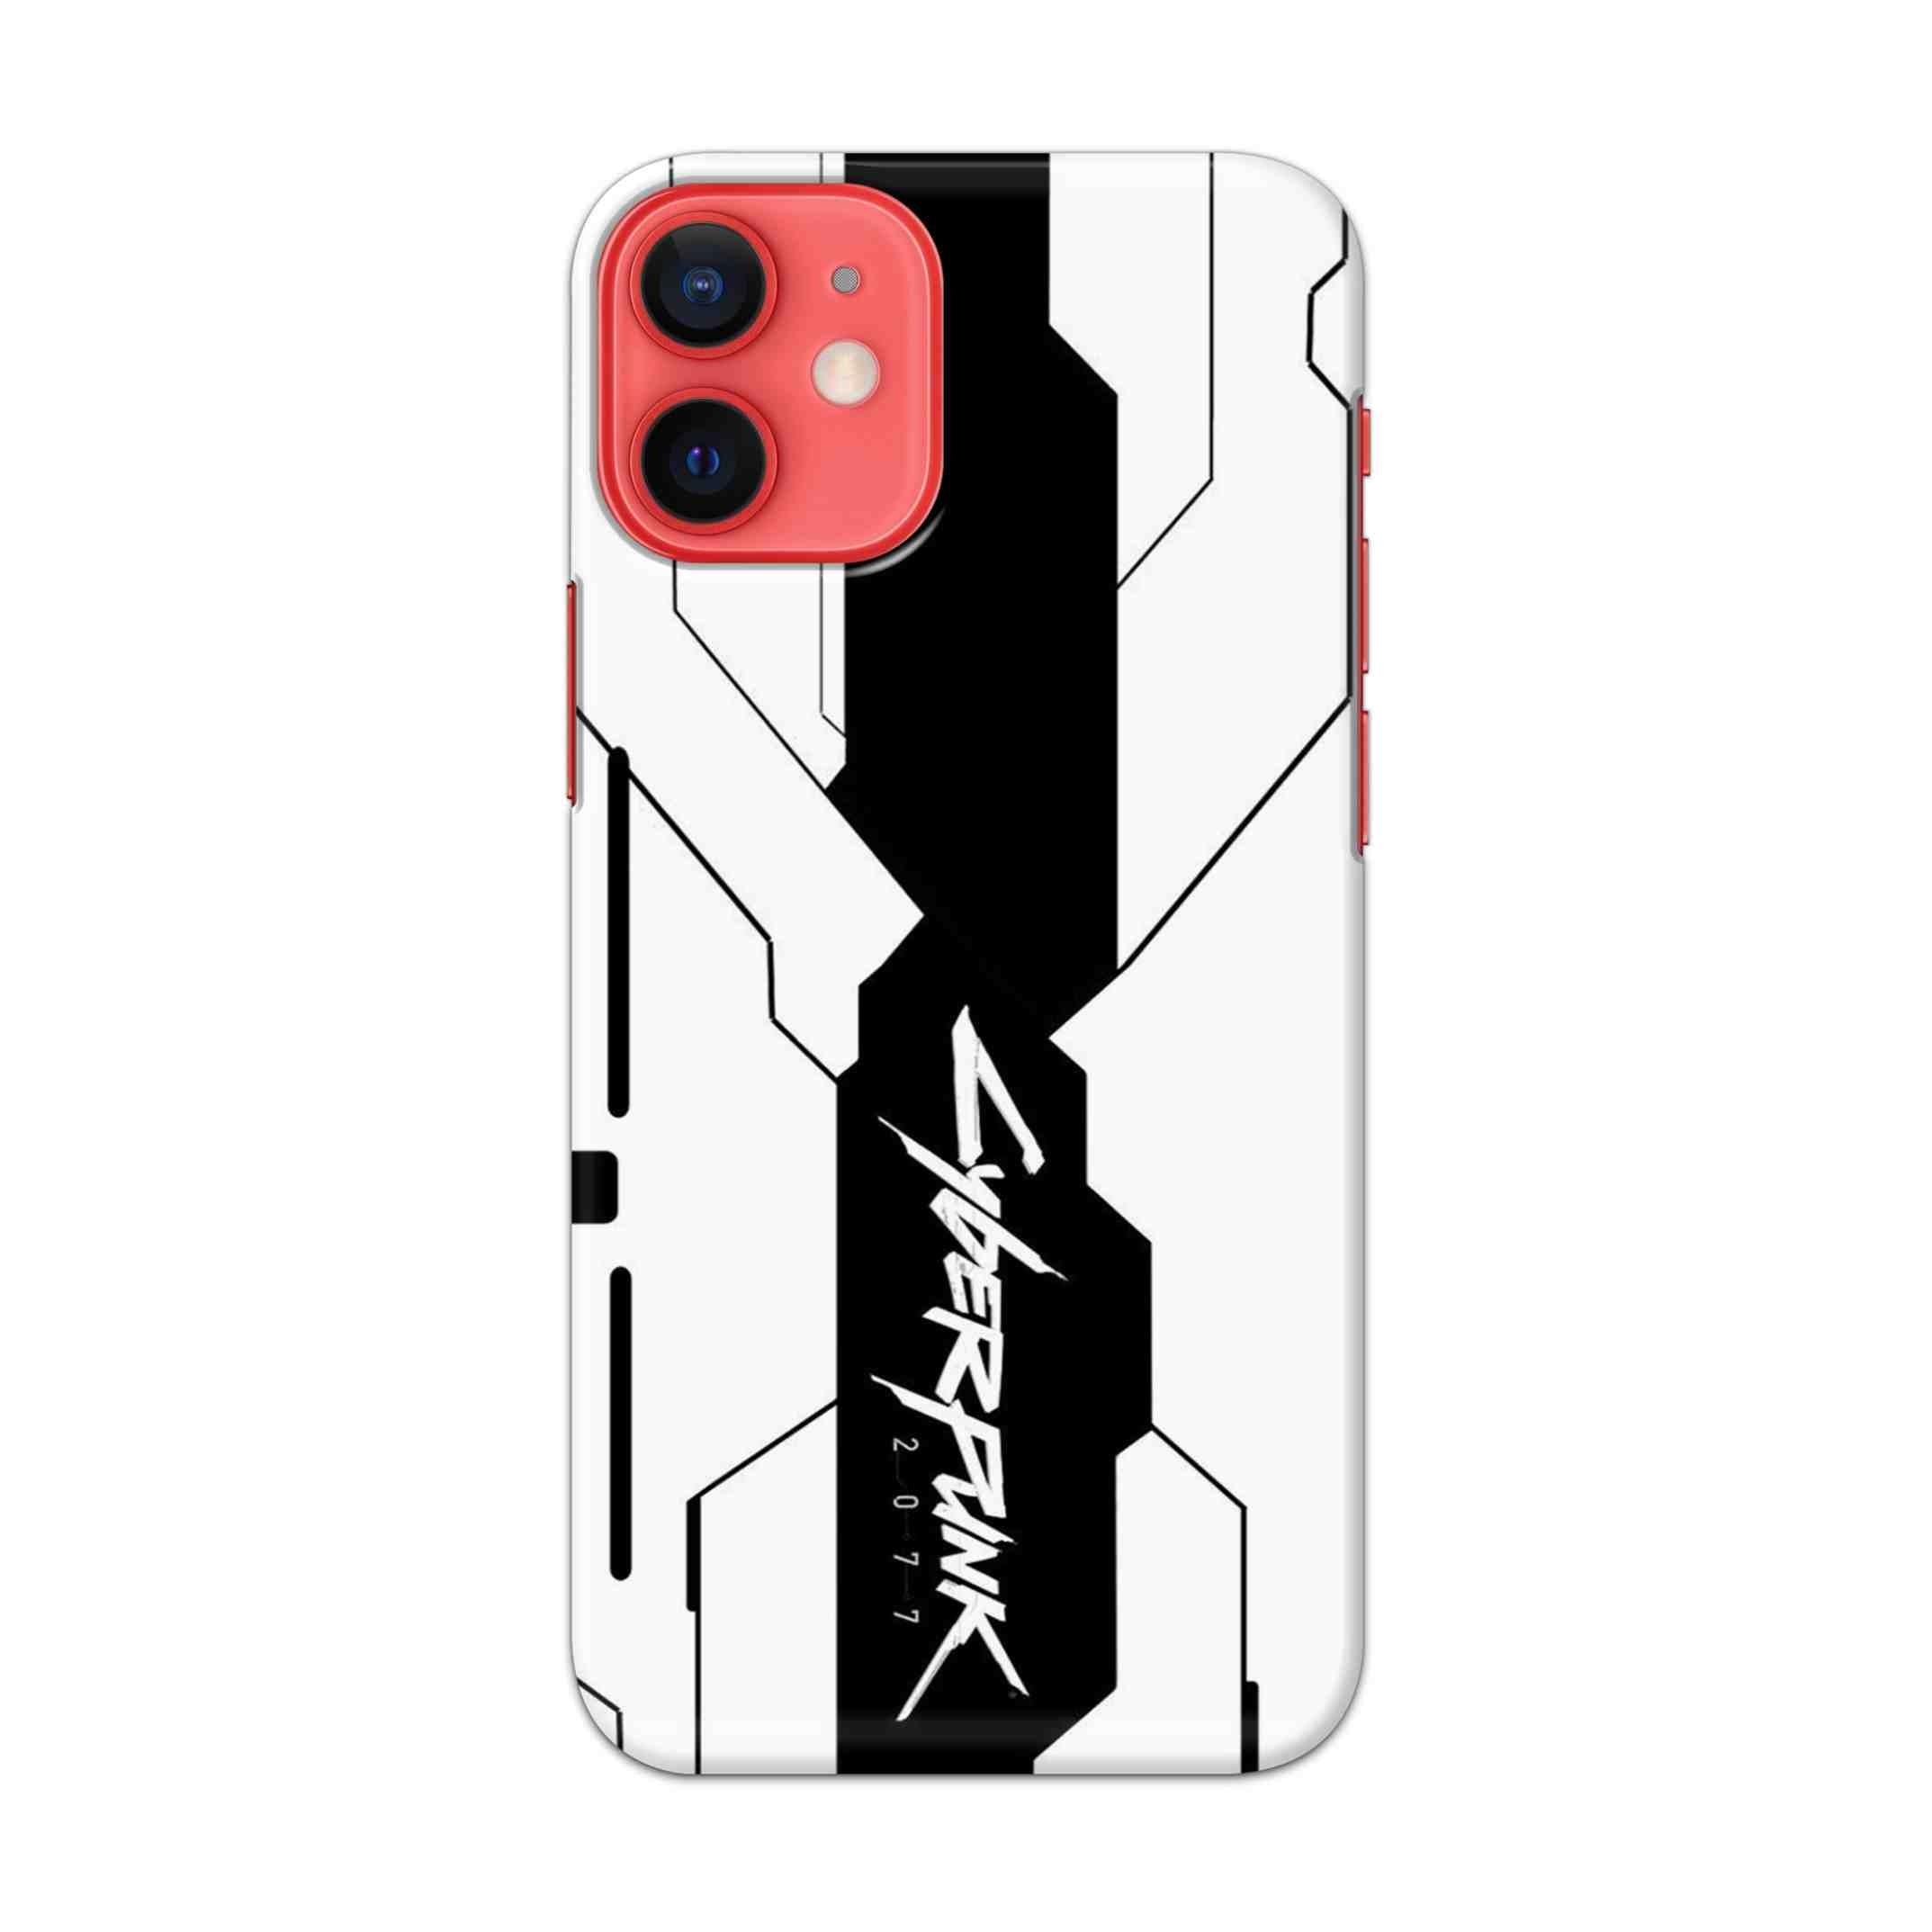 Buy Cyberpunk 2077 Hard Back Mobile Phone Case/Cover For Apple iPhone 12 mini Online